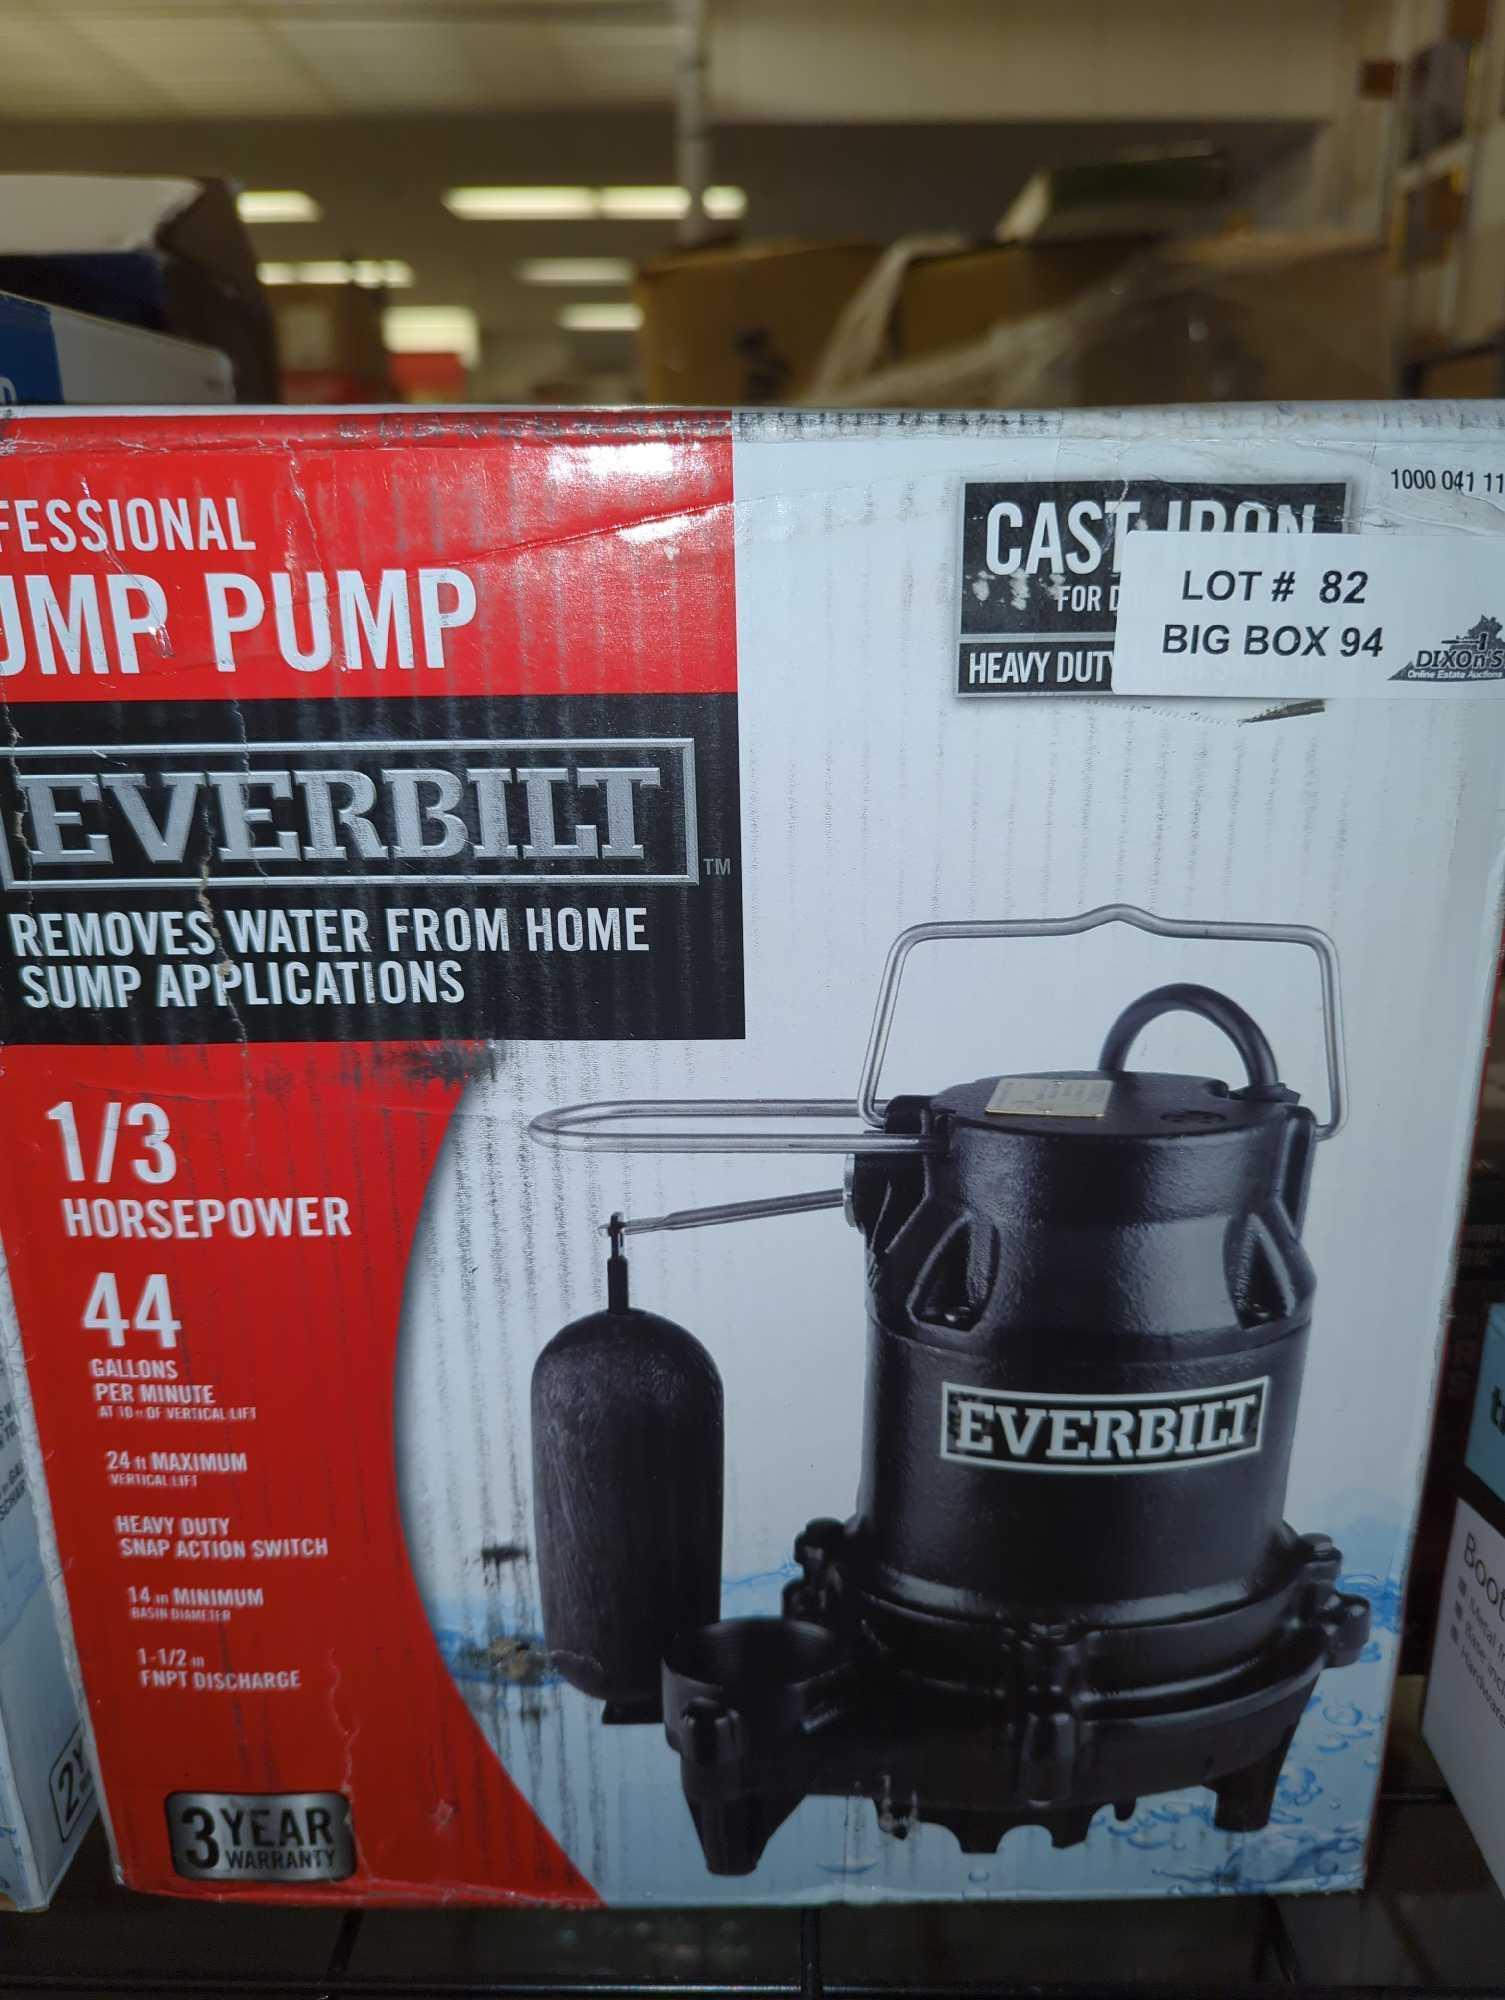 Everbilt 1/3 HP Cast Iron Sump Pump, Appears to be Heavily Used Retail Price Value $187, What you